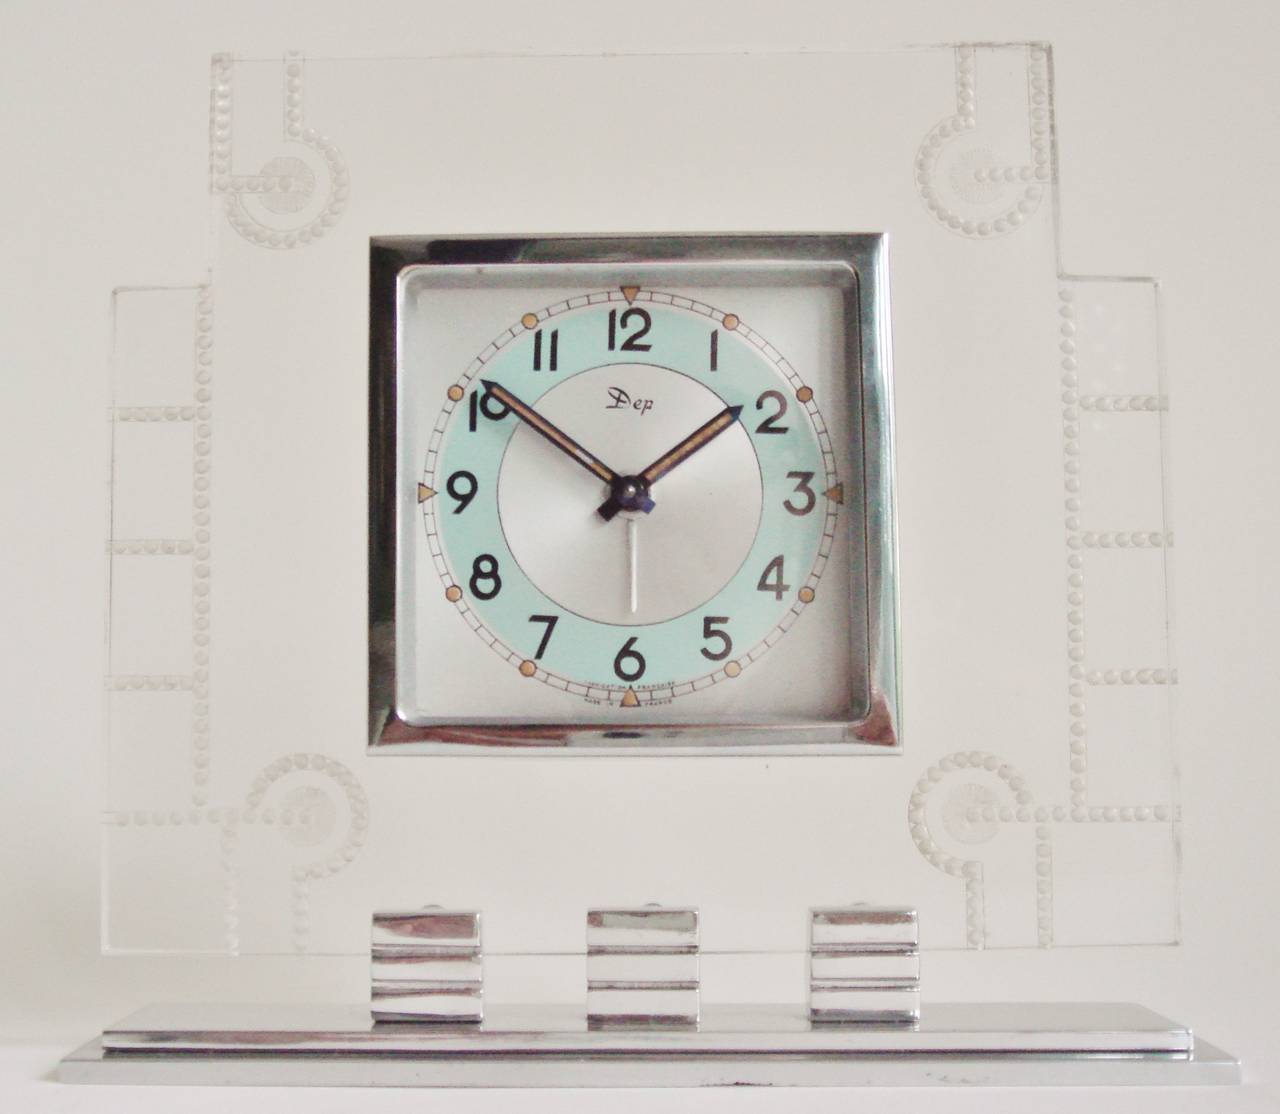 This rare and extremely pretty French Art Deco alarm clock features polished aluminium and chrome accents framed by a clear Lucite body. This clear Lucite panel is reverse dot etched in a geometric pattern. The face itself carries the script logo of